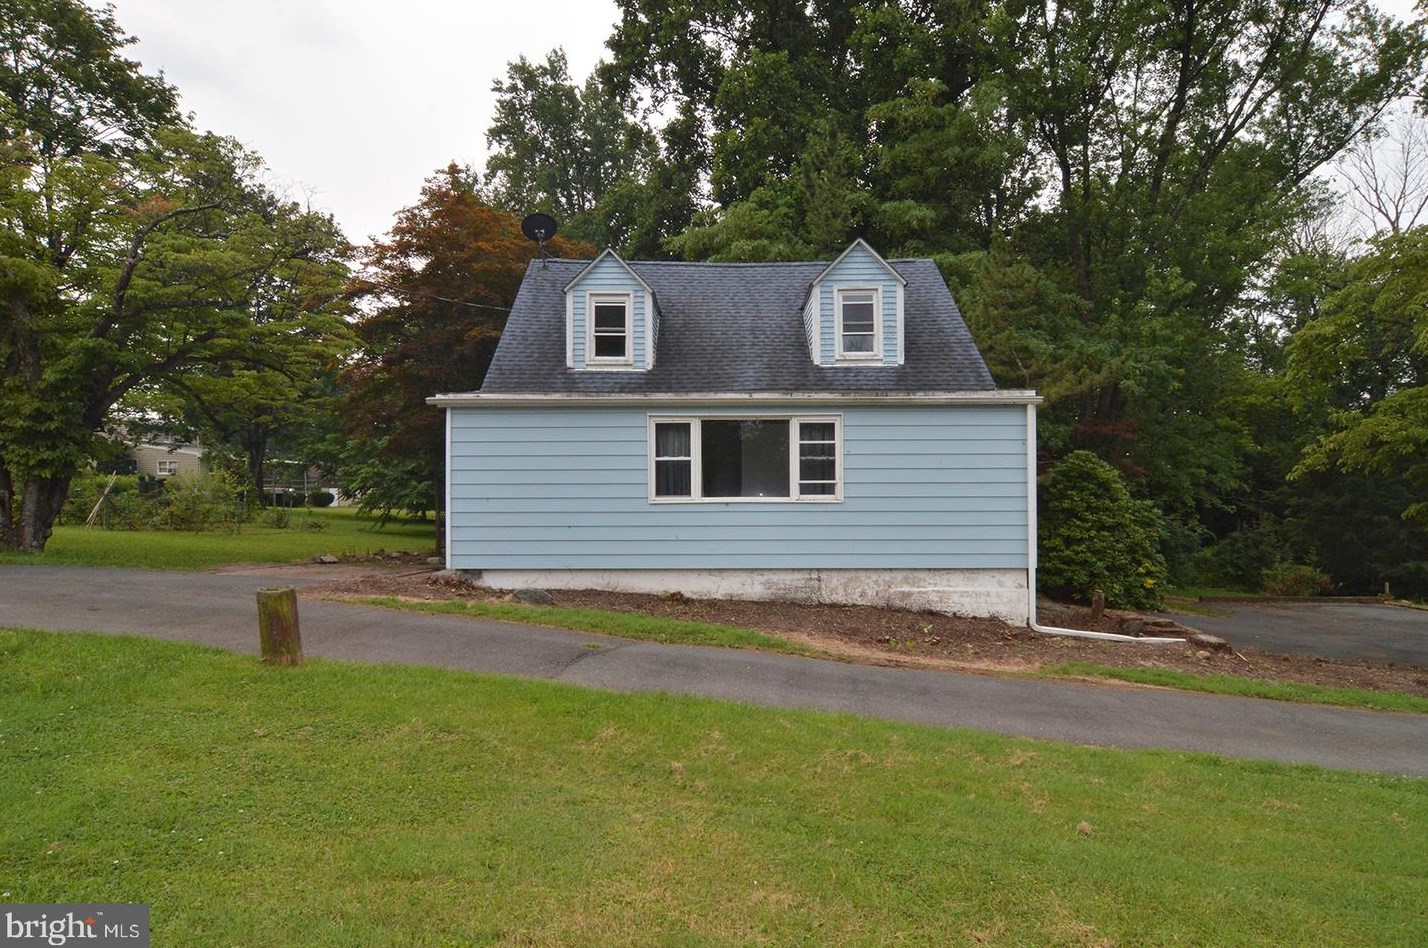 5730 Littlefield Ave, Reading, PA 19606-3717